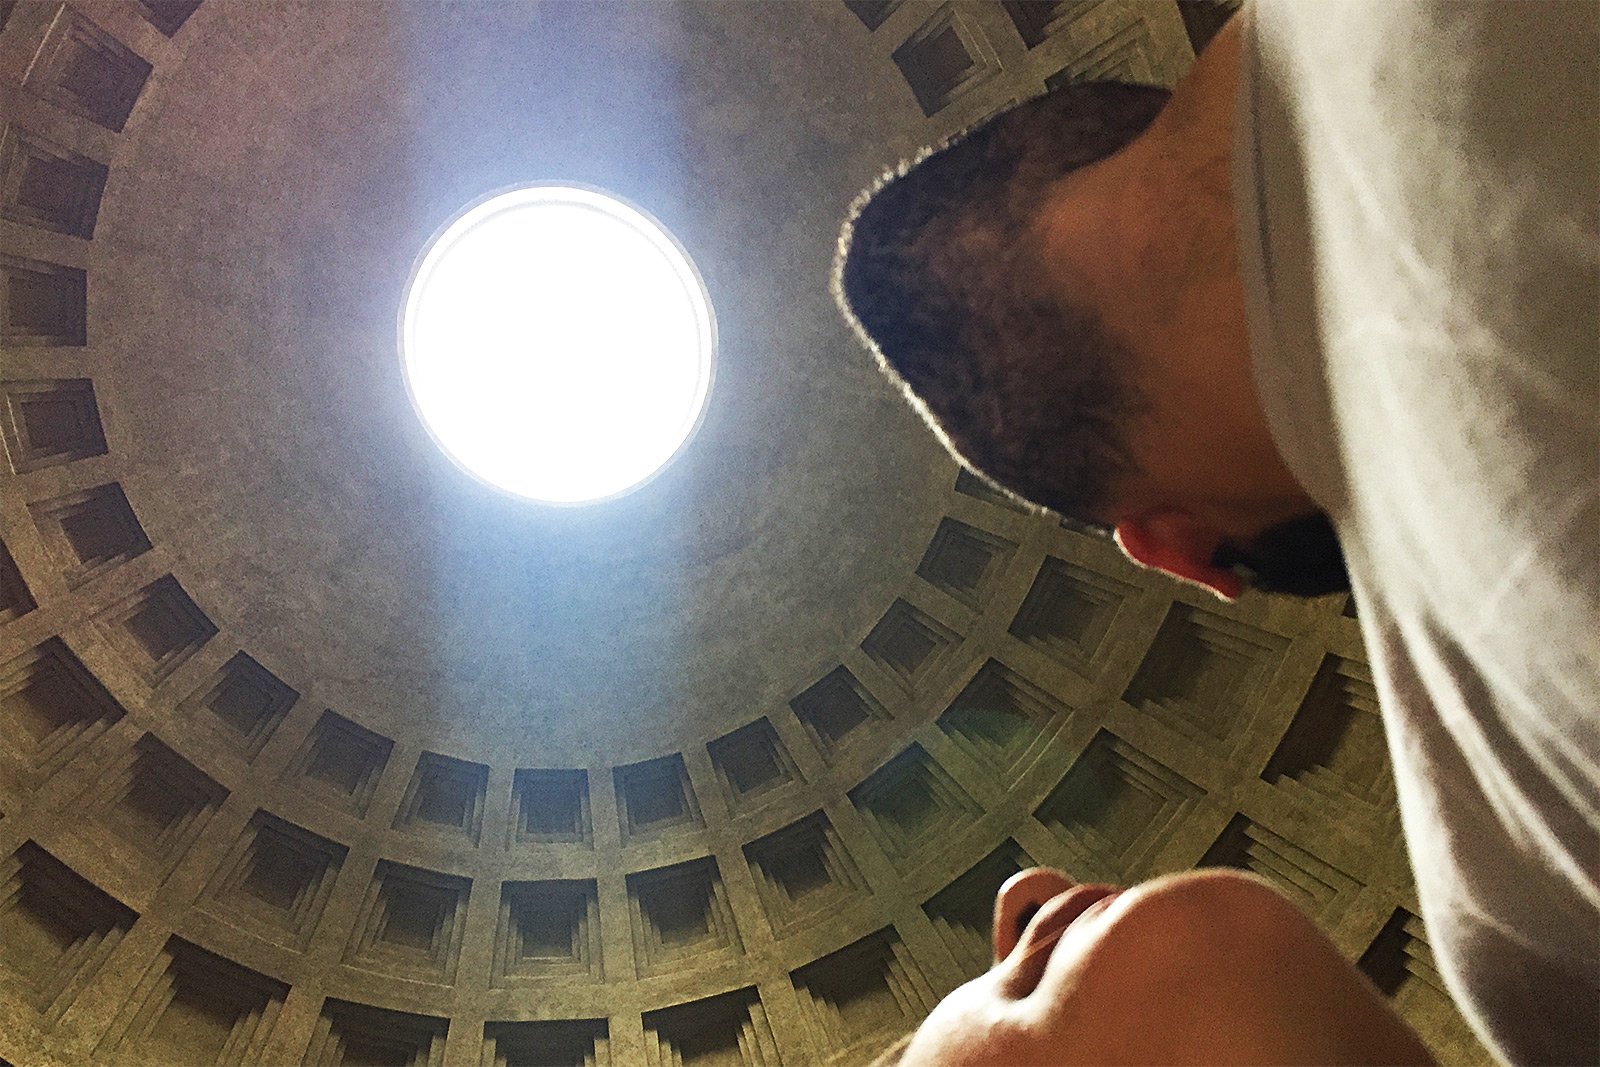 How to take an Oculus selfie in Rome